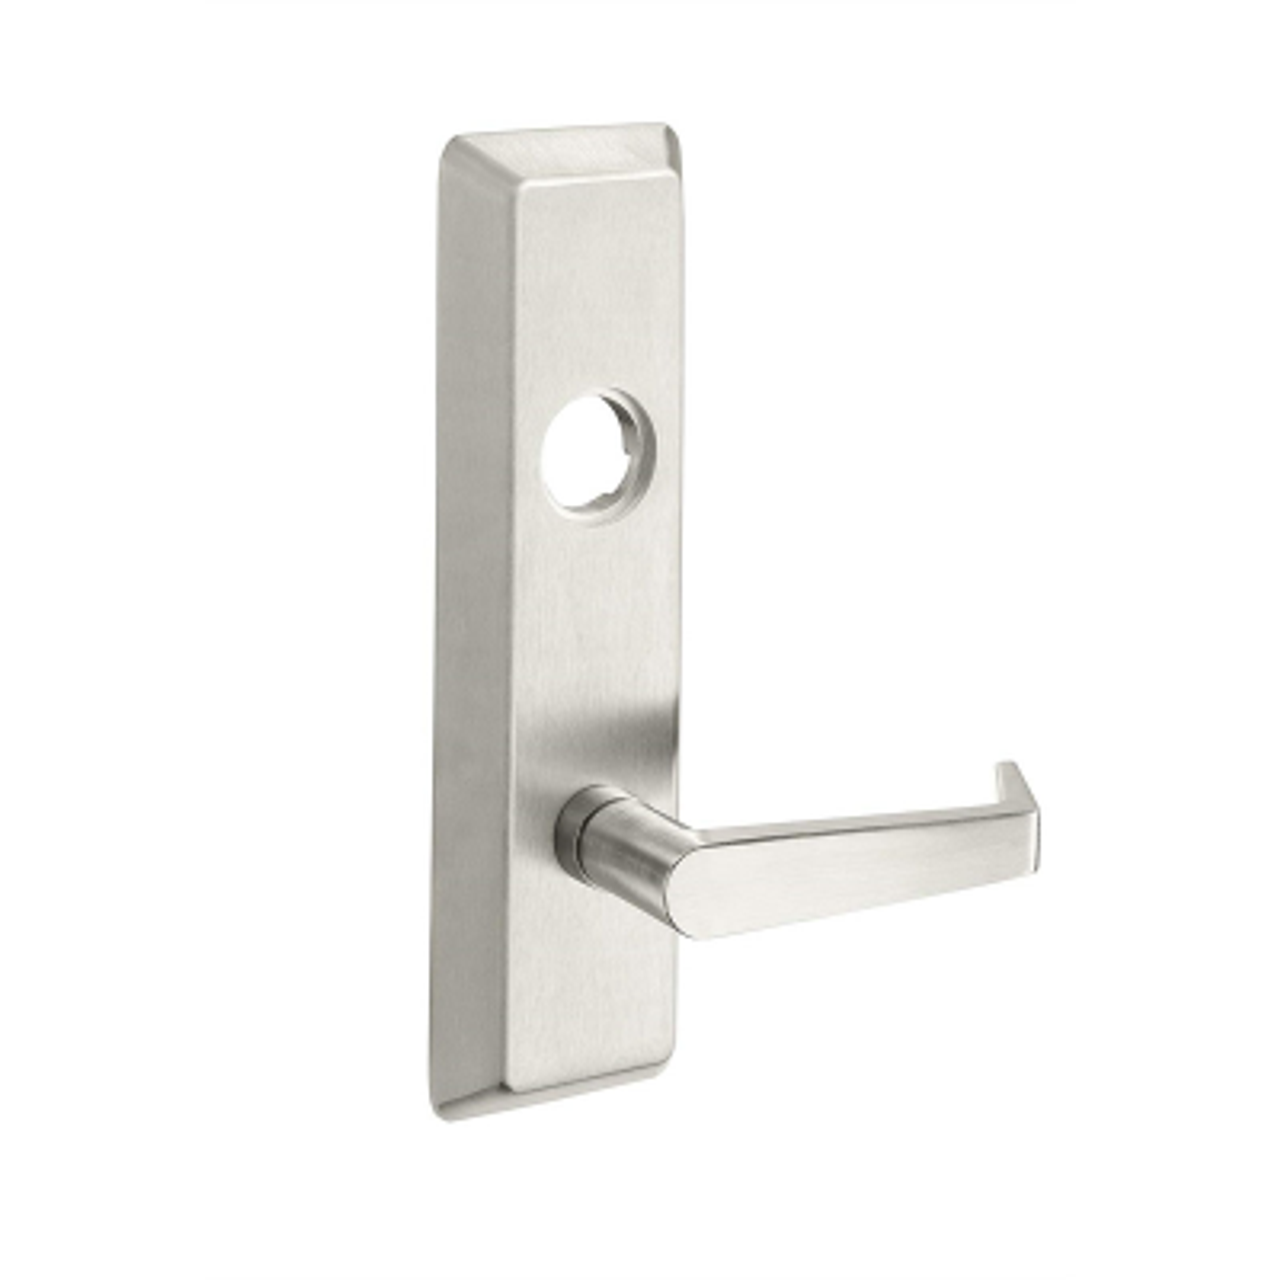 Yale 620F Series Escutcheon Trim for 6100 Series Exit Devices